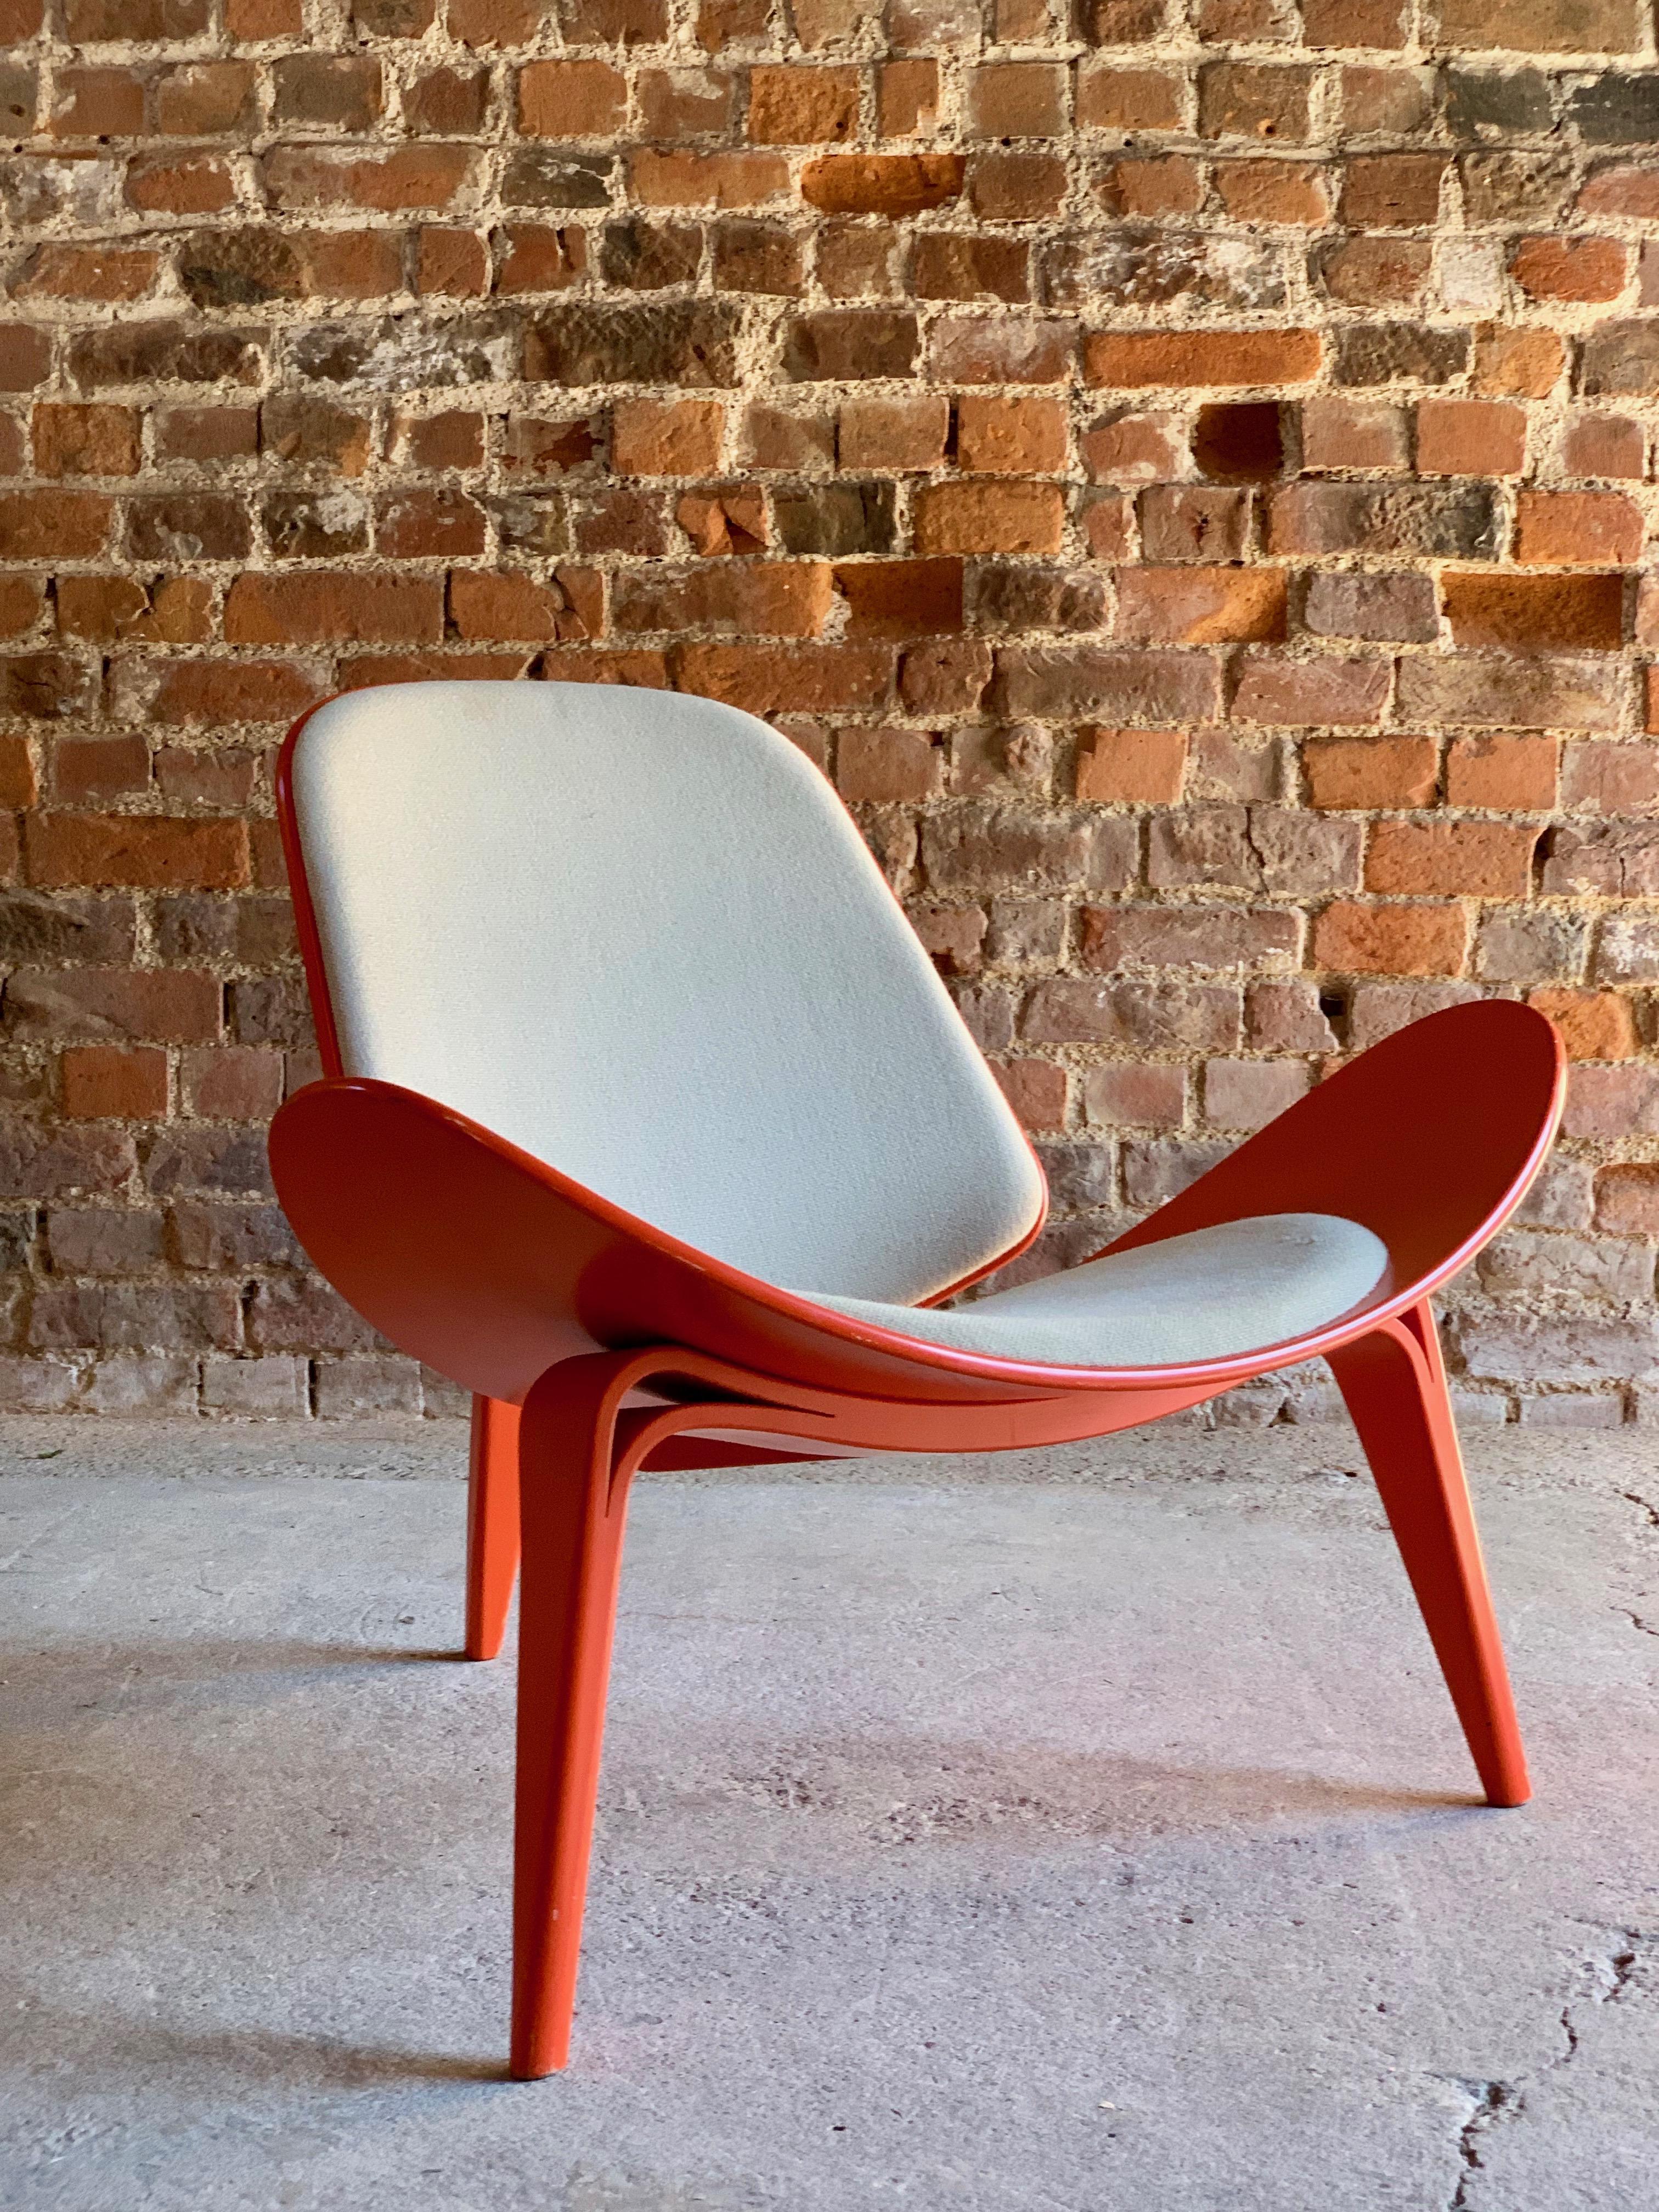 Hans Wegner CH07 shell chair Carl Hansen & Son, Denmark. 

The CH07 shell chair was created in 1963, but the design was ahead of its time and therefore has patiently waited for the spotlight for a number of decades. Today, it is considered one of